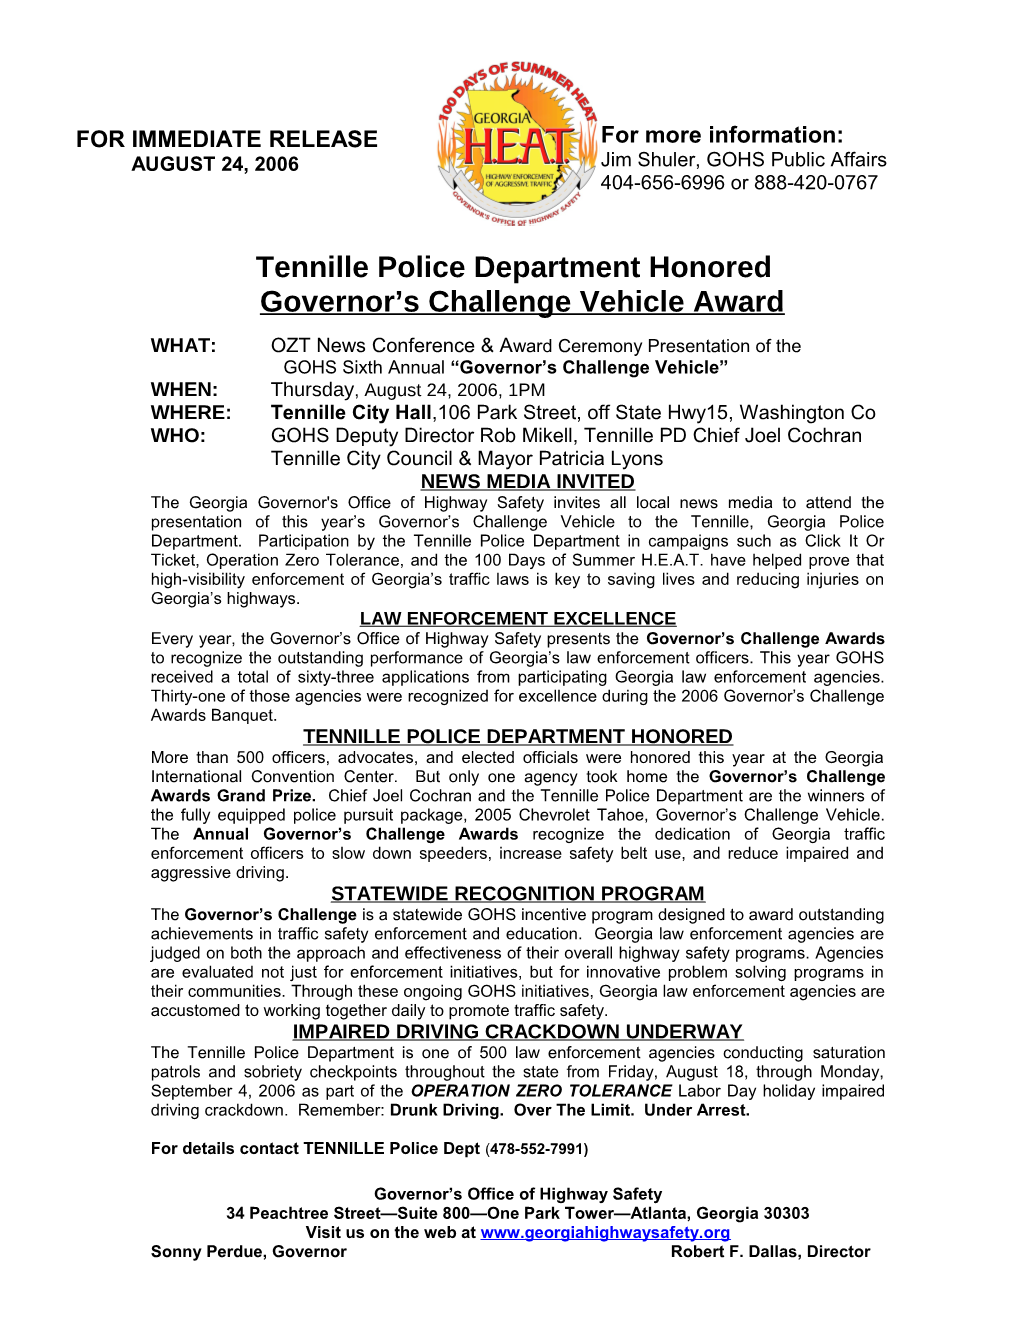 Tennille Police Department Honored